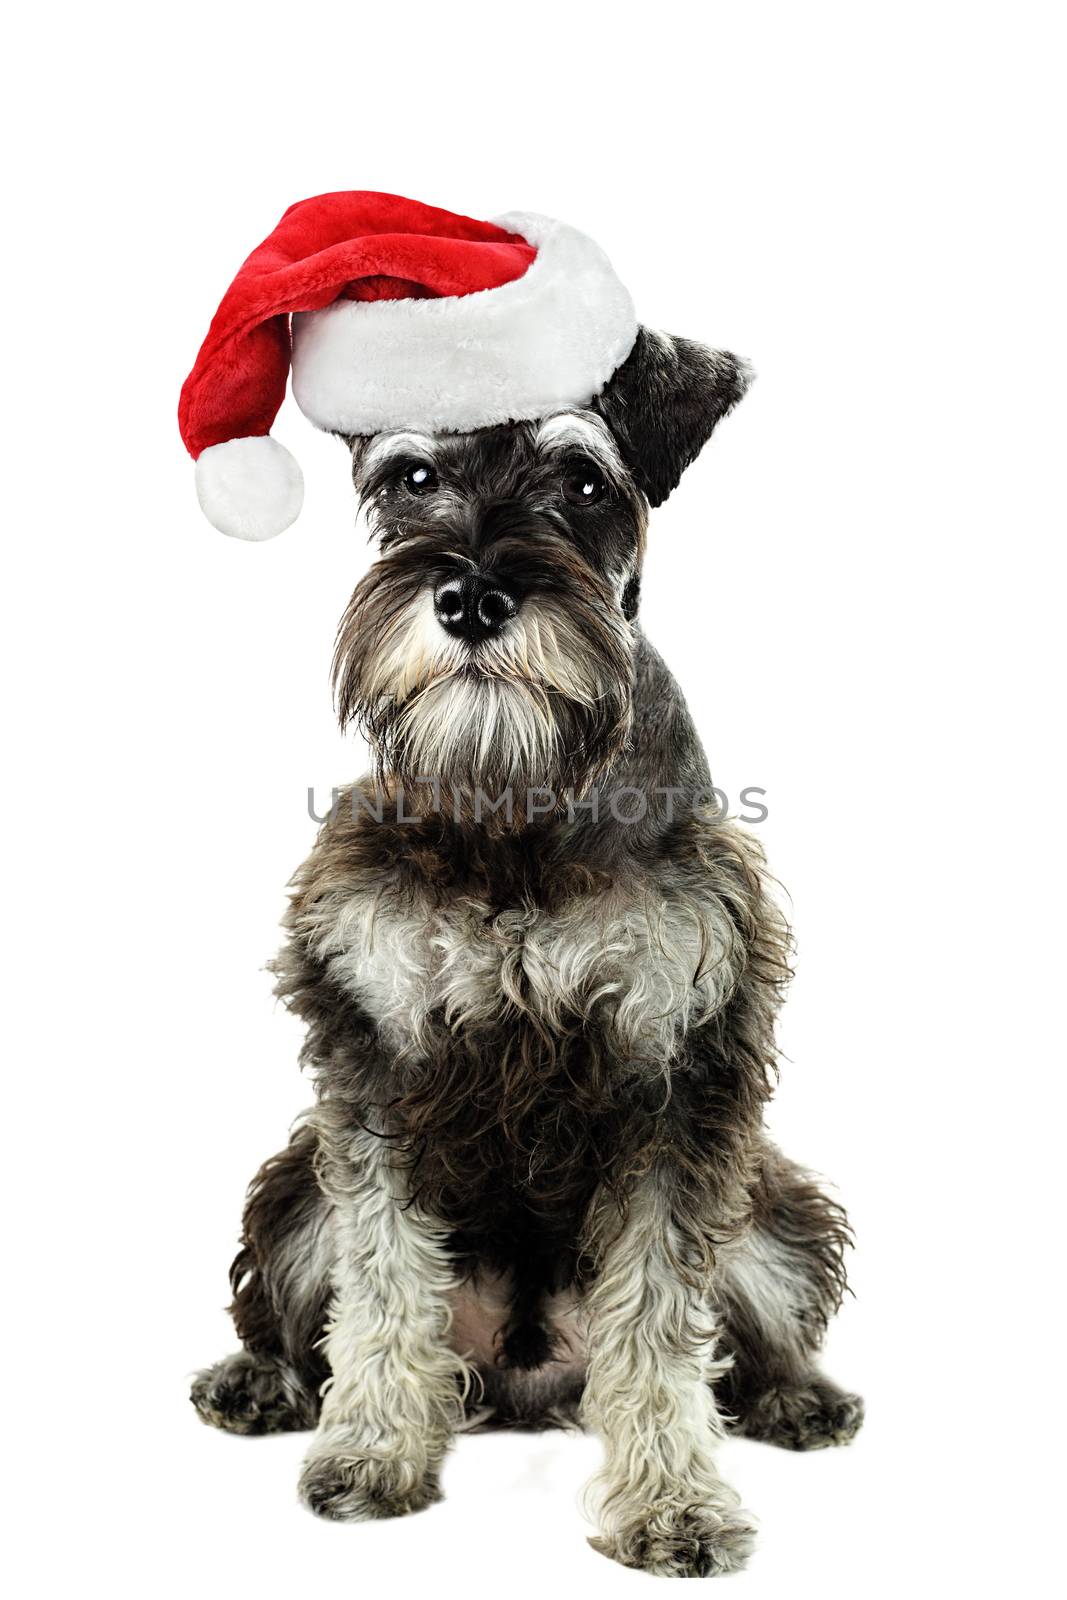 A six month old salt and pepper minature schnauzer isolated against a white background wearing a Christmas hat.